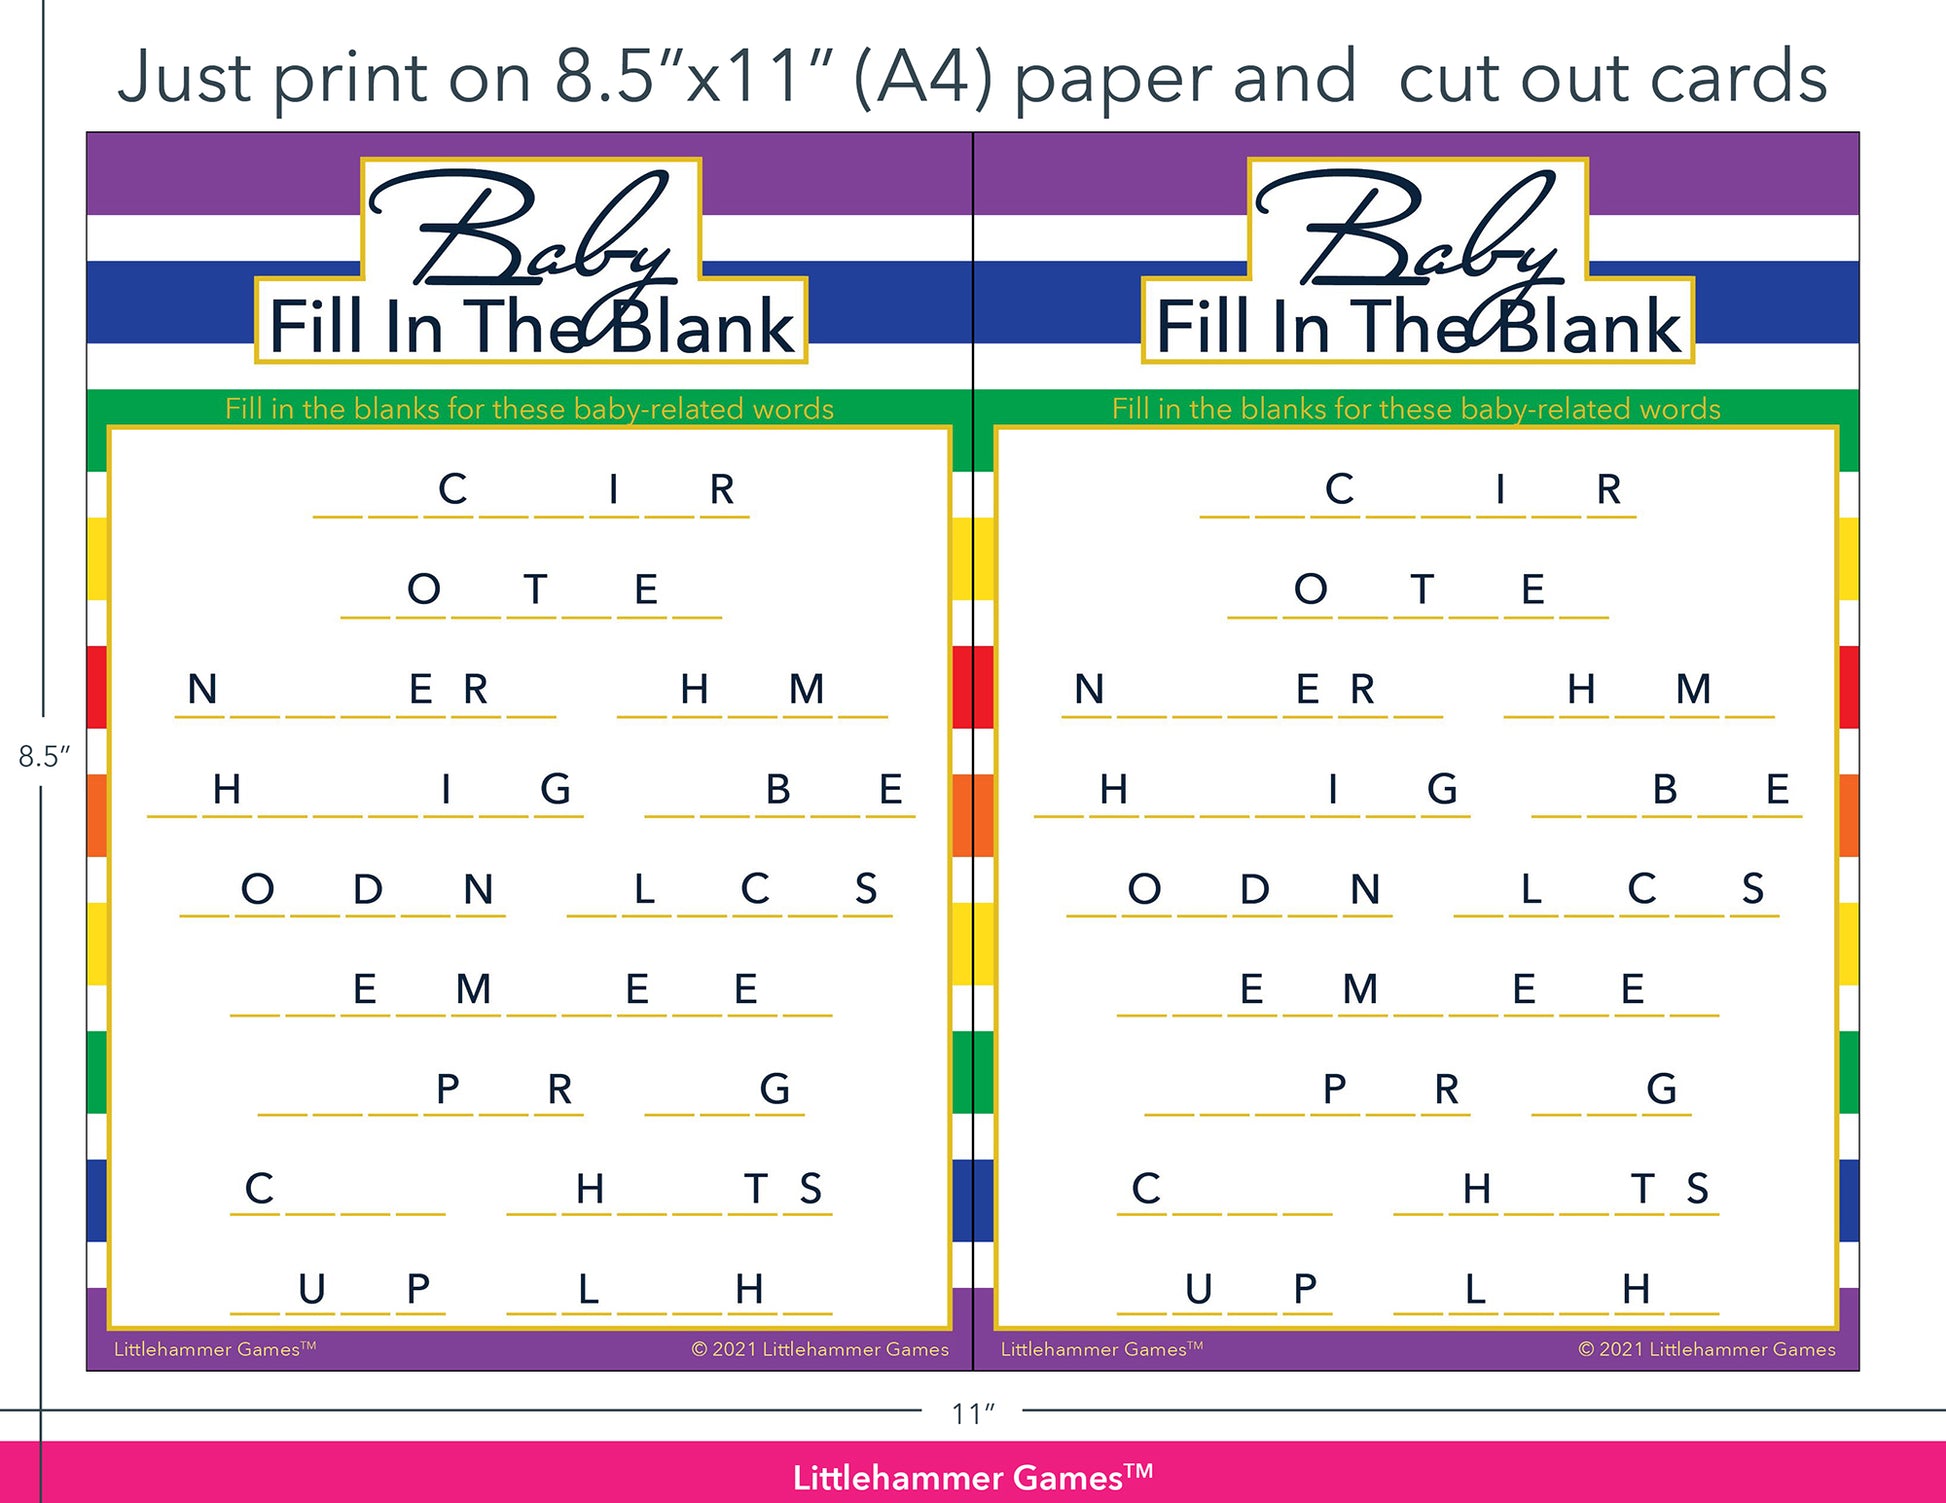 Baby Fill in the Blank rainbow-striped game cards with printing instructions